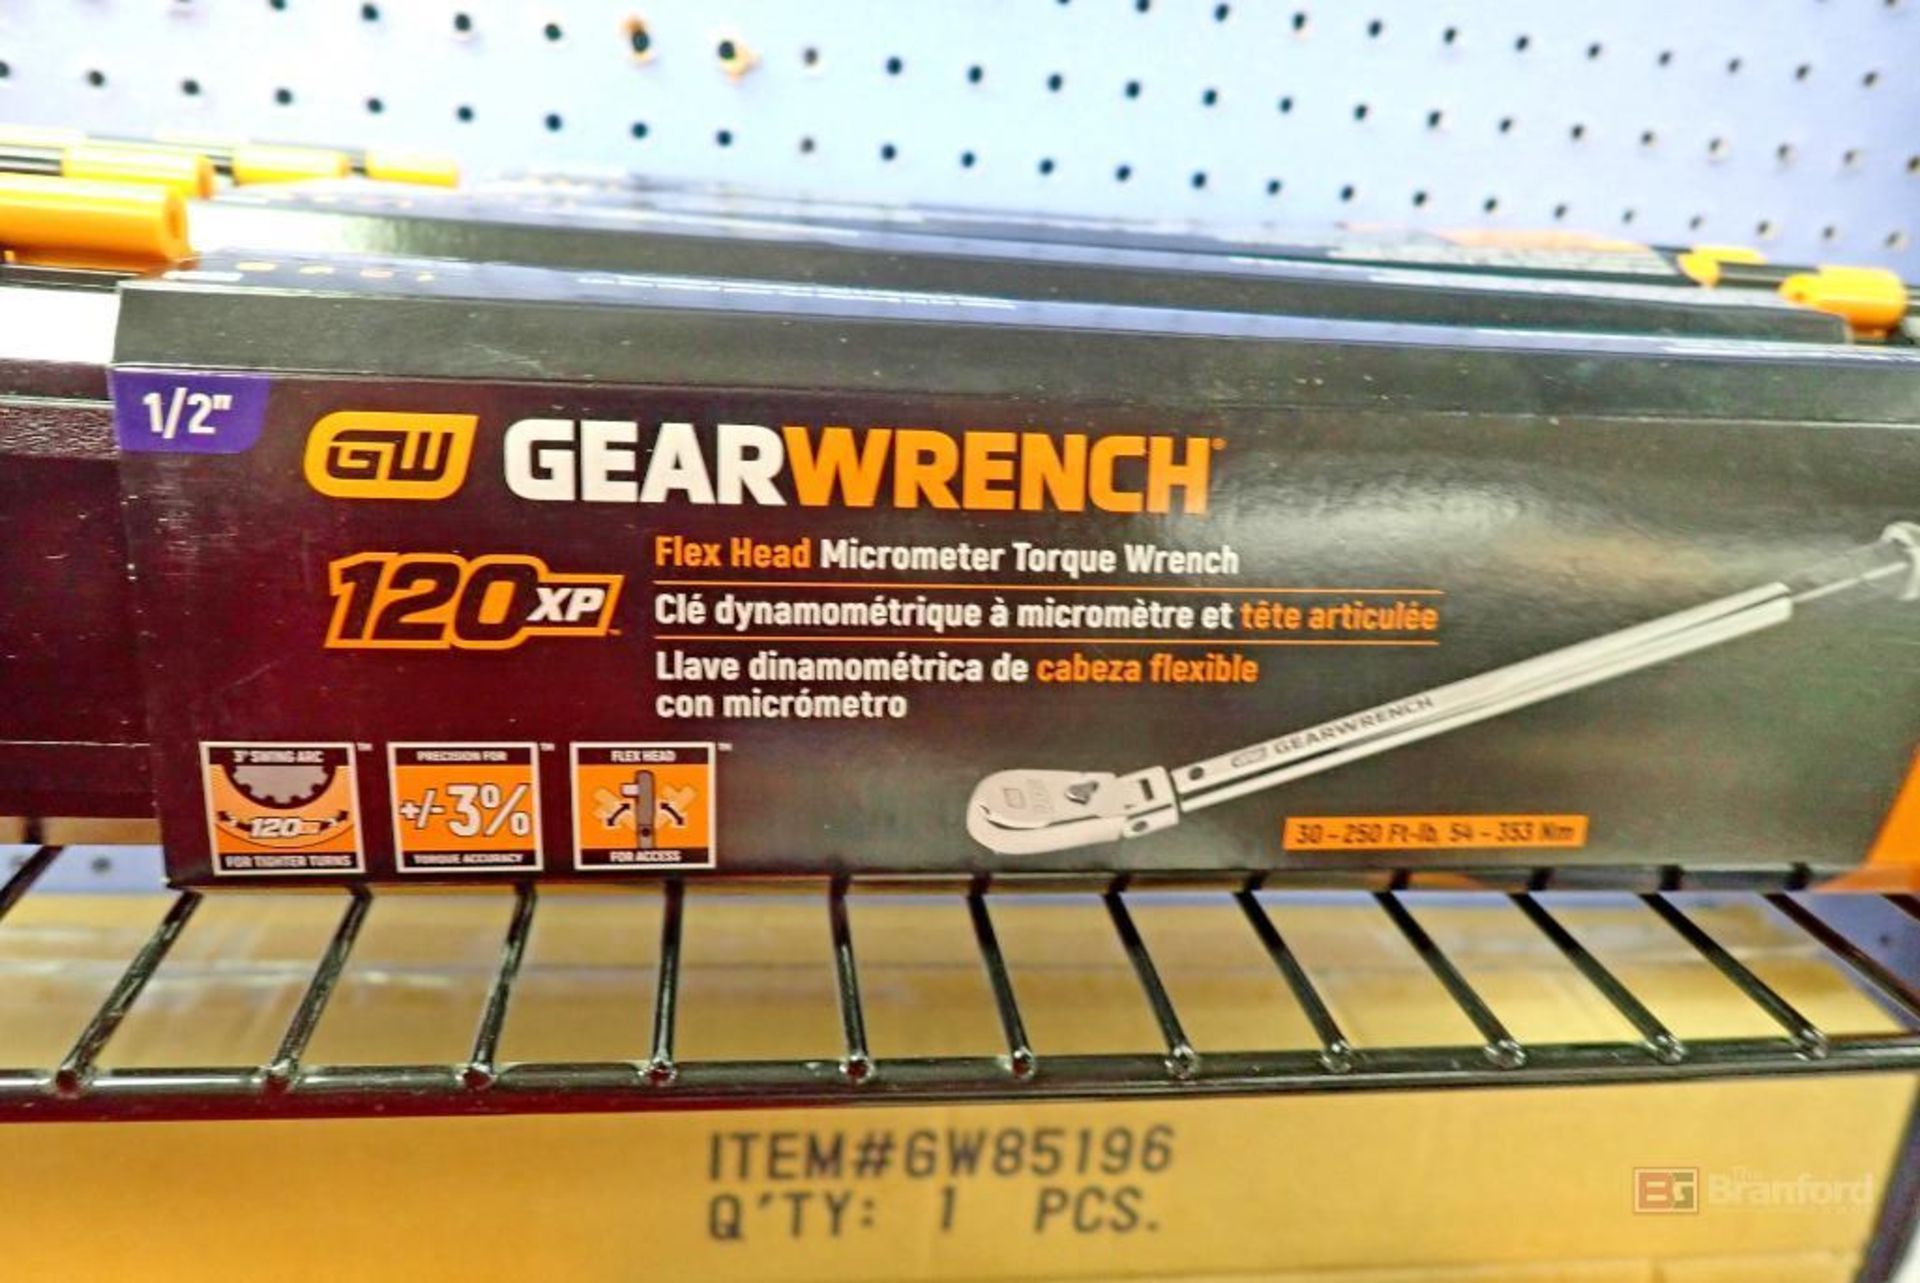 GearWrench 120XP 85189 Flex Head Micrometer Torque Wrench - Image 2 of 3